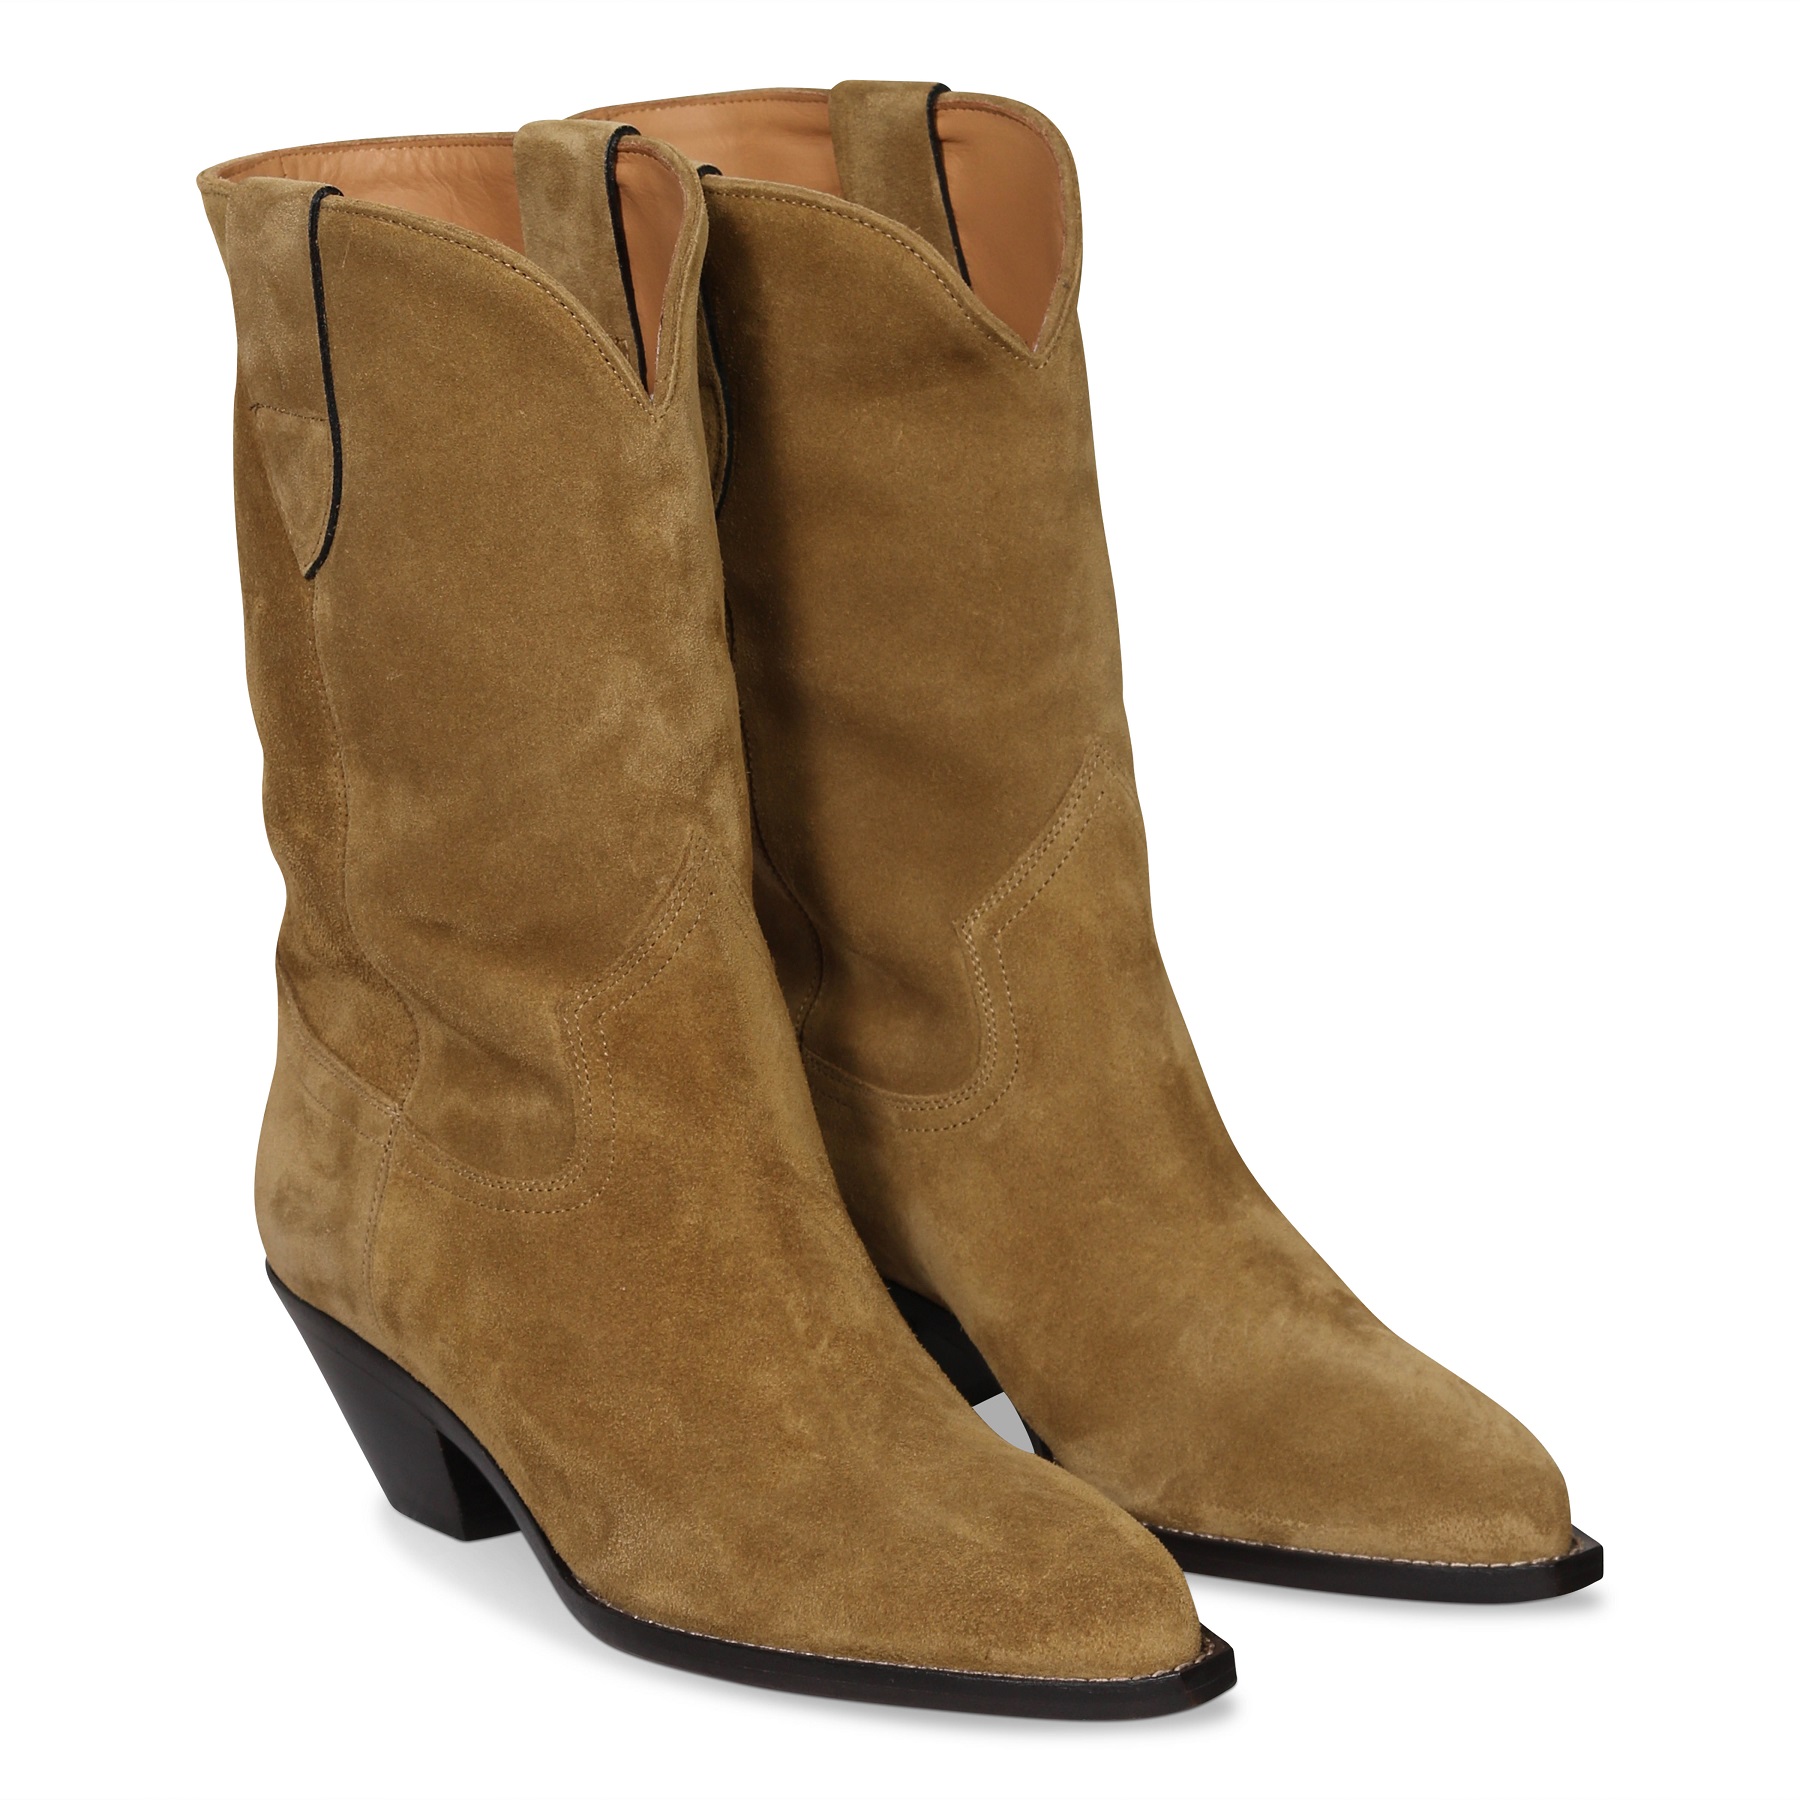 ISABEL MARANT Dahope Boots in Taupe 41